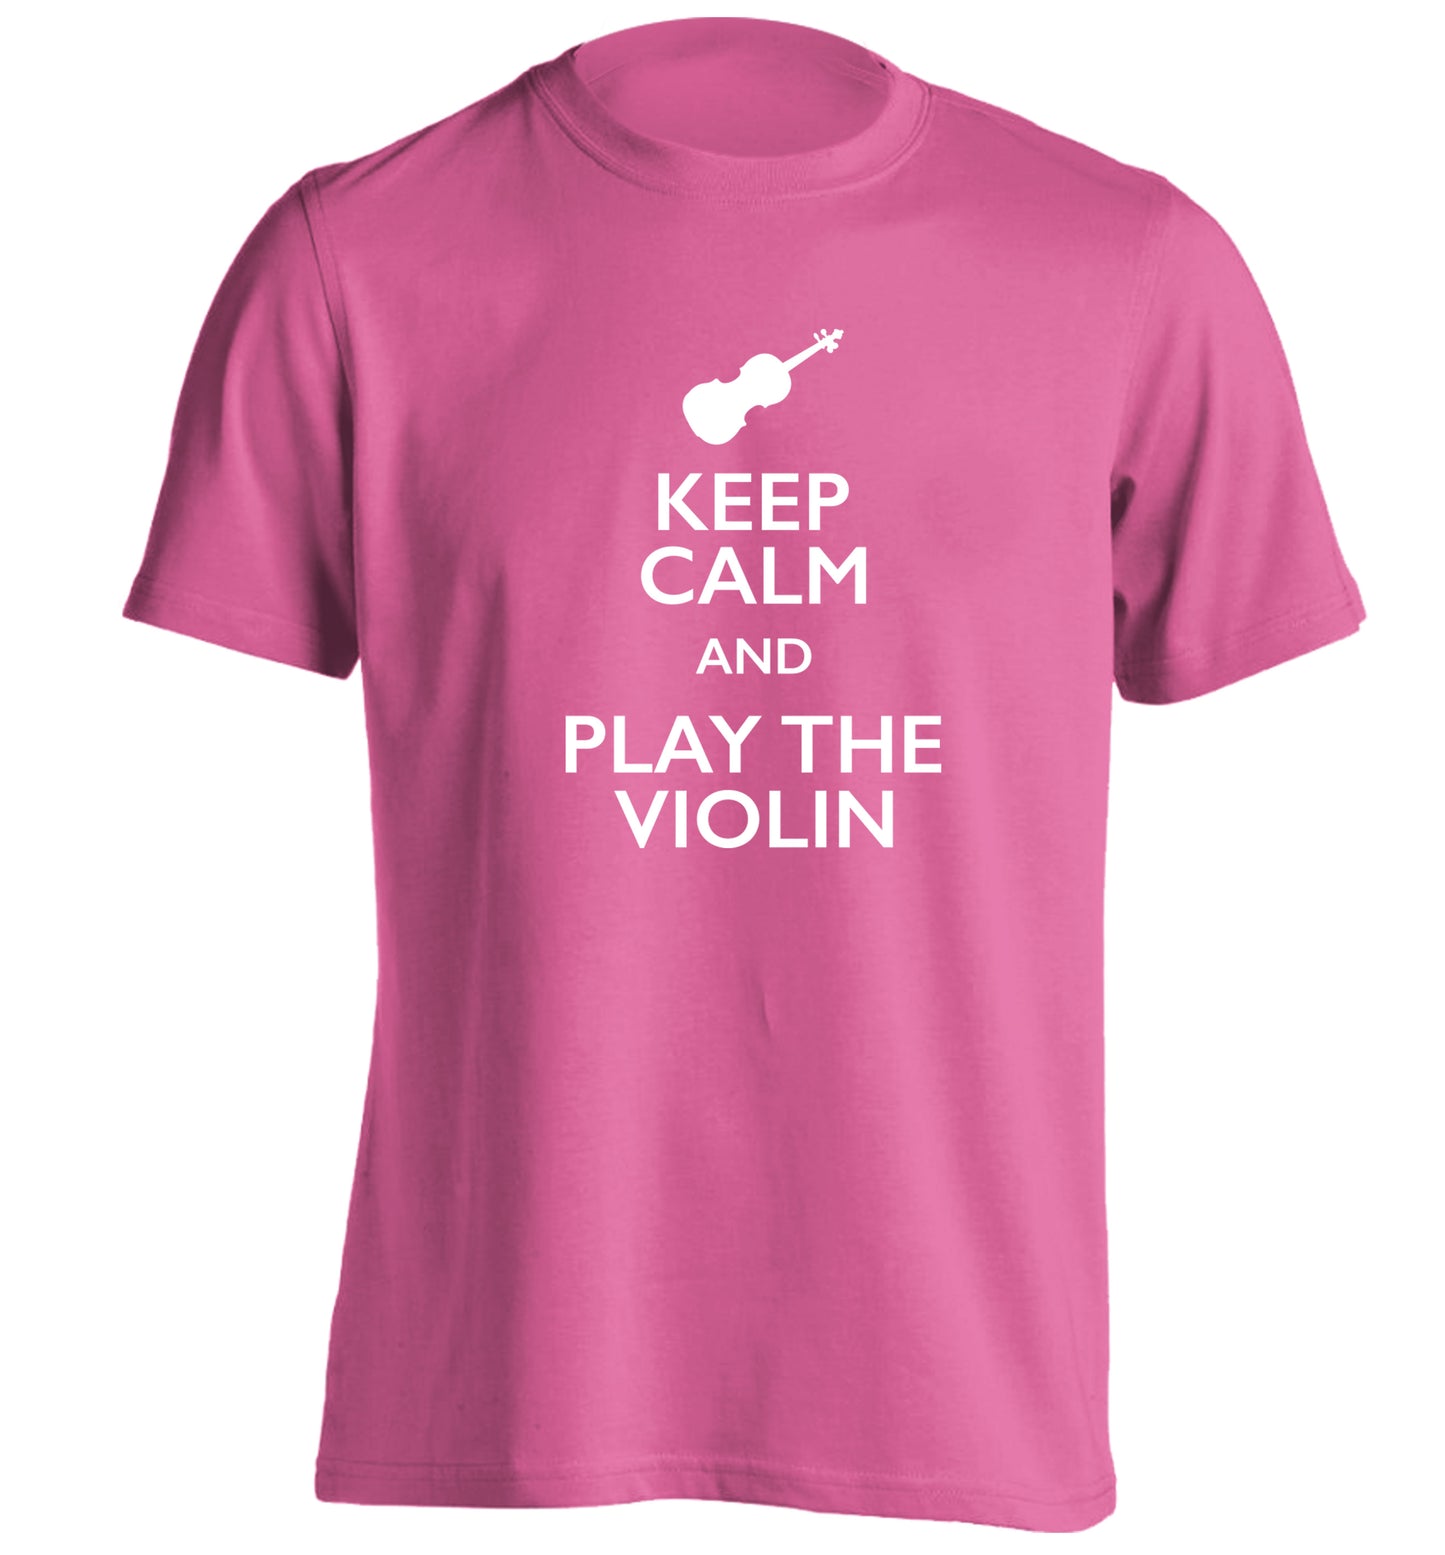 Keep calm and play the violin adults unisex pink Tshirt 2XL